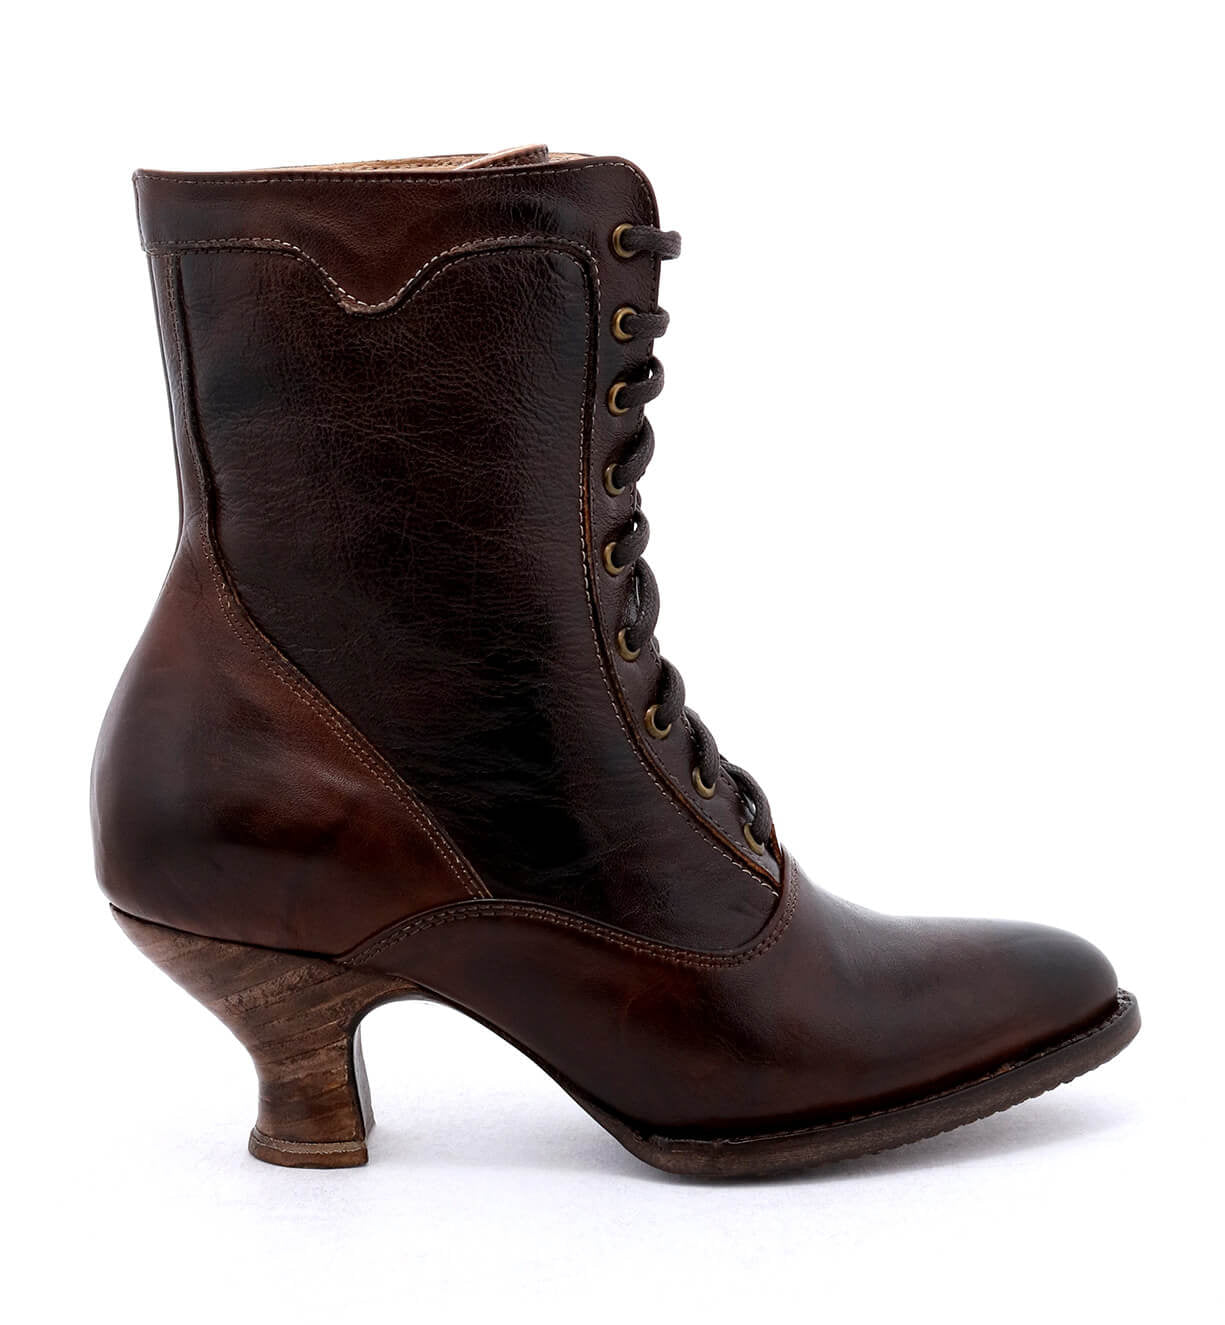 An Eleanor women's brown leather boot with wooden heel, hand dyed to ensure uncompromising quality, crafted by Oak Tree Farms.